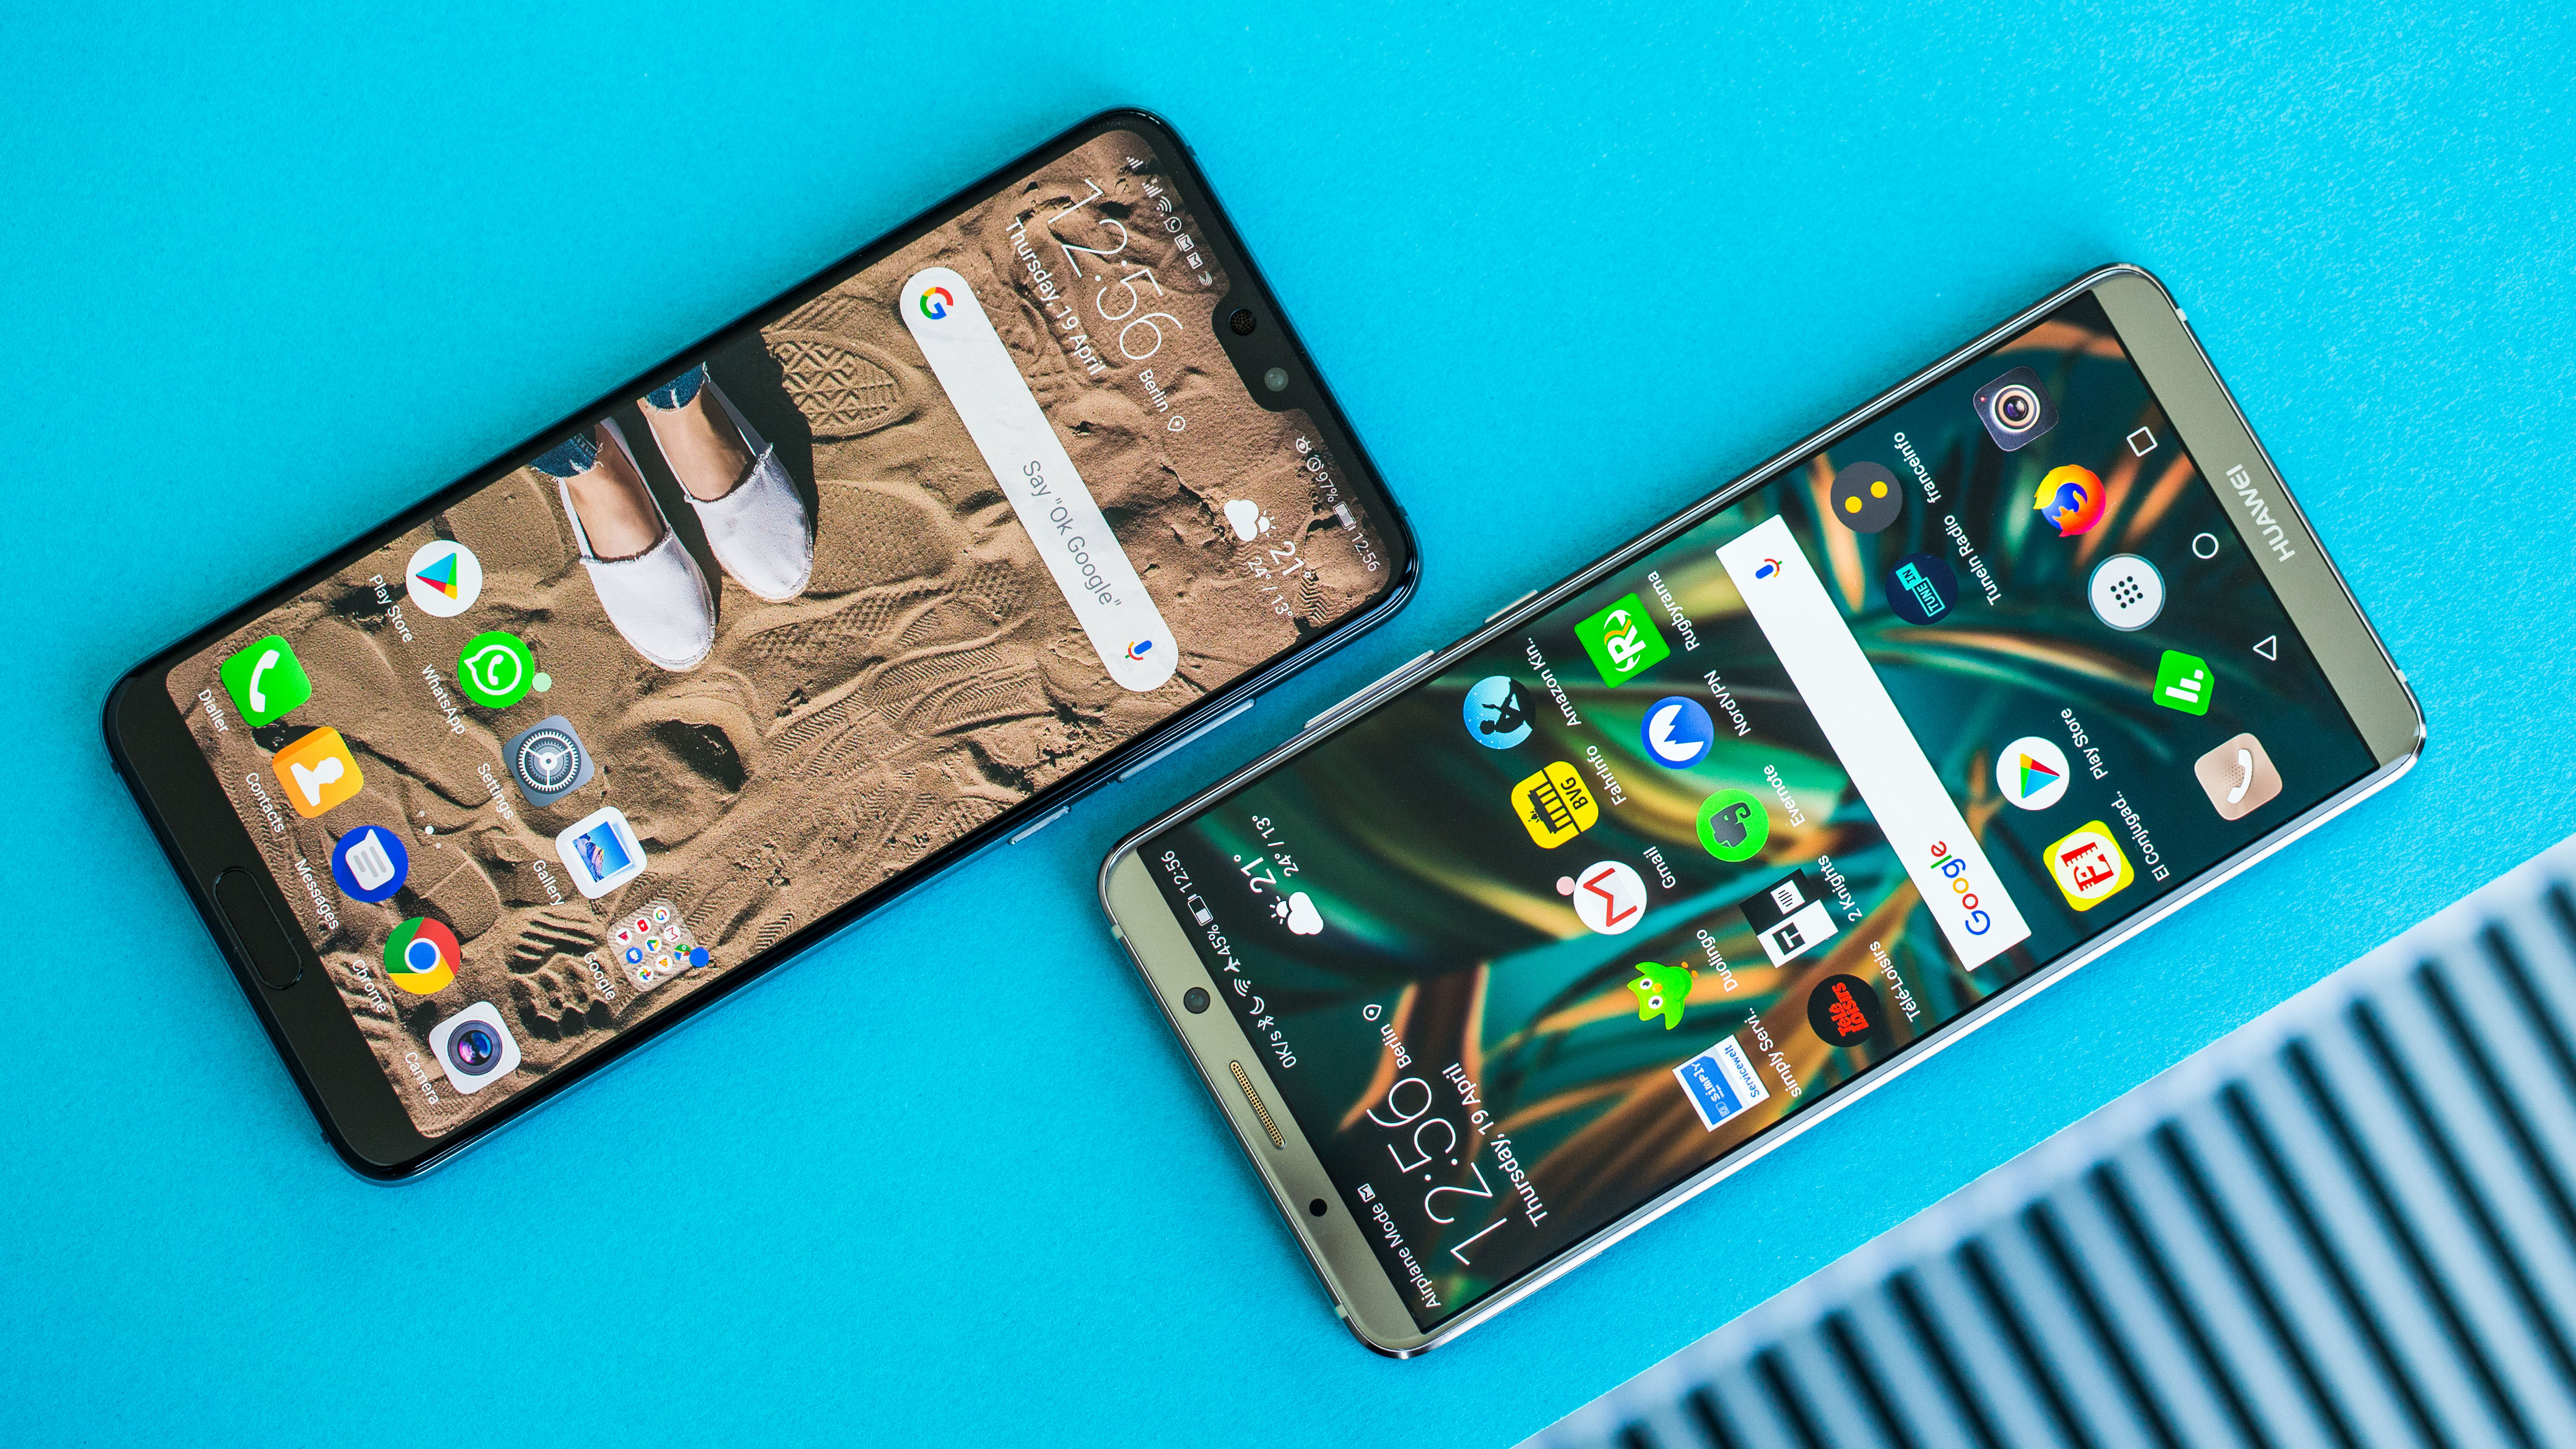 Concurrenten Wantrouwen Duplicaat P20 Pro vs Mate 10 Pro: who's the real head of the Huawei family? | nextpit